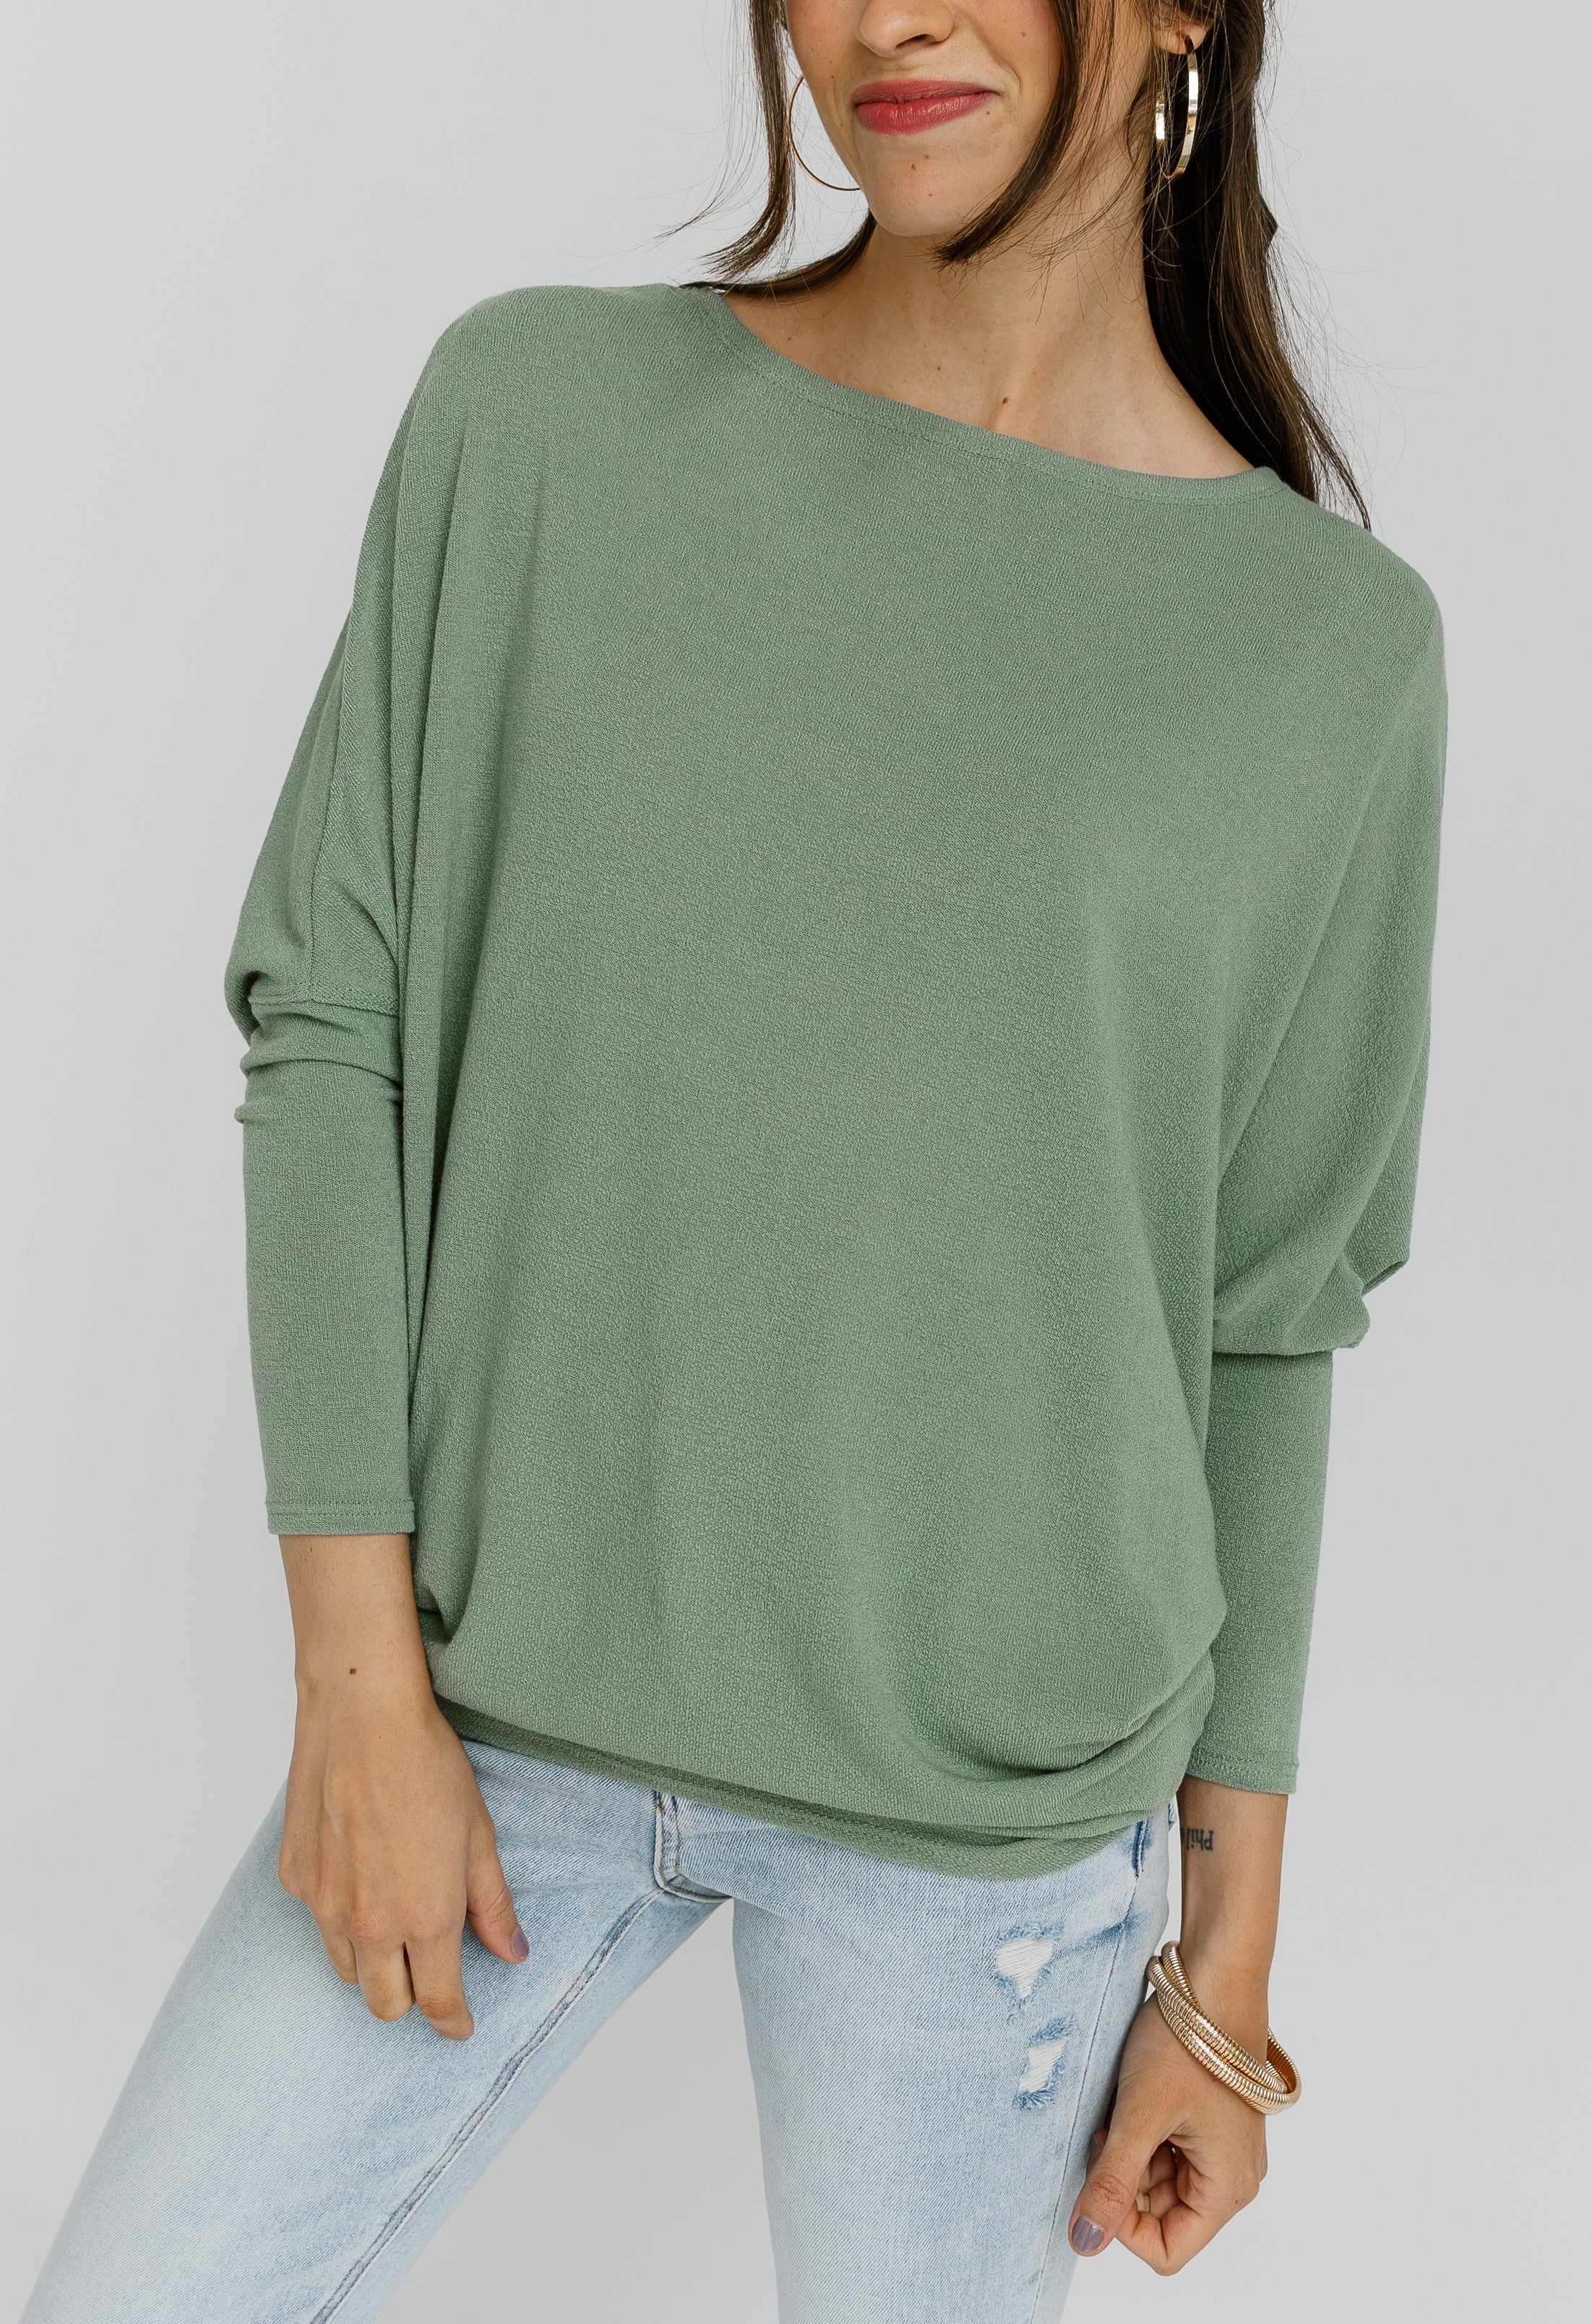 Favorite Comfy Tunic - NEW OLIVE - willows clothing L/S Shirt